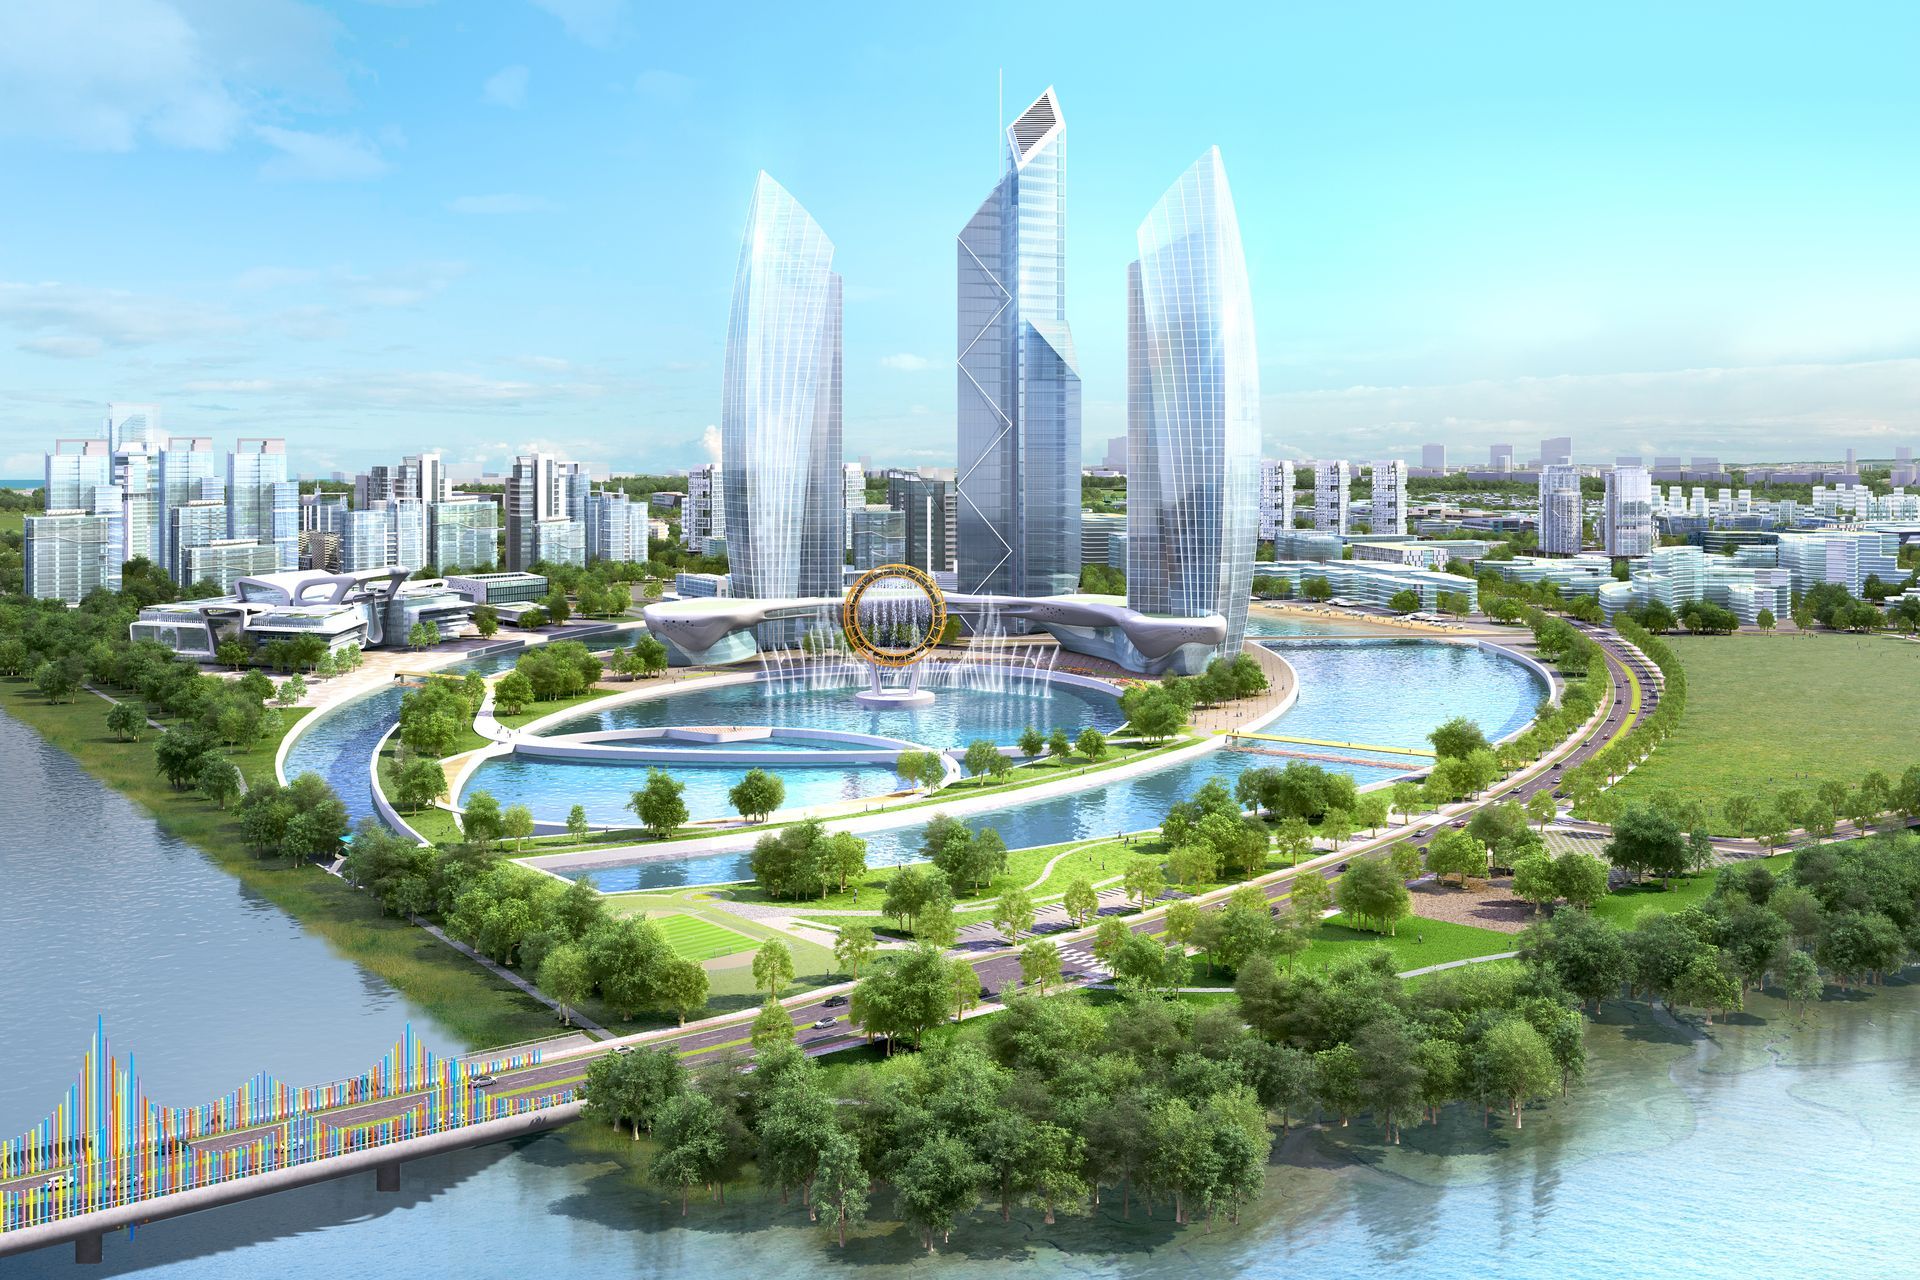 An image depicting a site where new international schools in Korea may one day be based